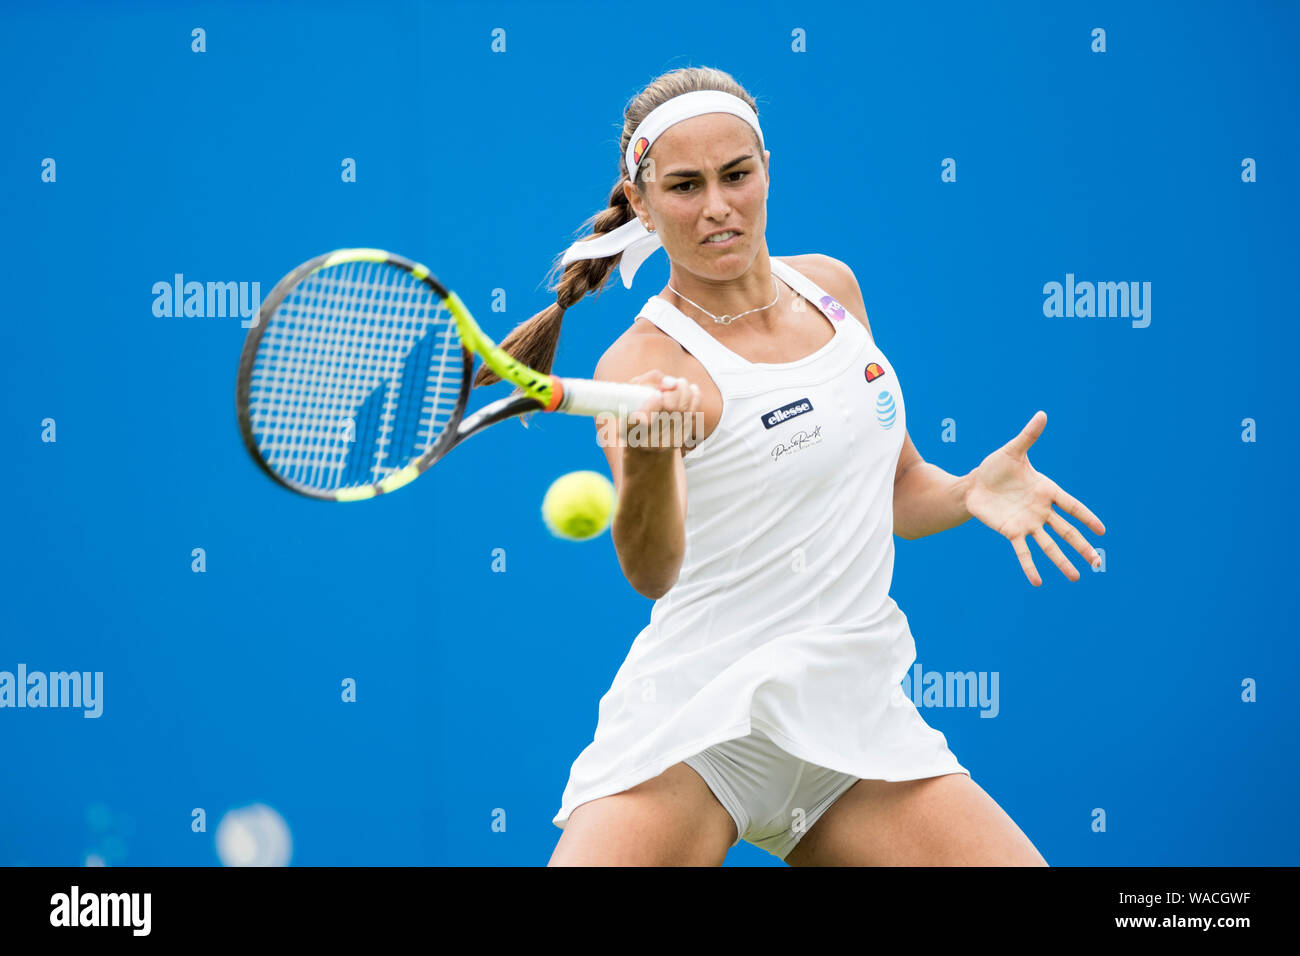 Monica Puig of Puerto Rico playing single handed forehand against Kristina  Mladenovic of France at Aegon International 2016, Eastbourne, England - T  Stock Photo - Alamy